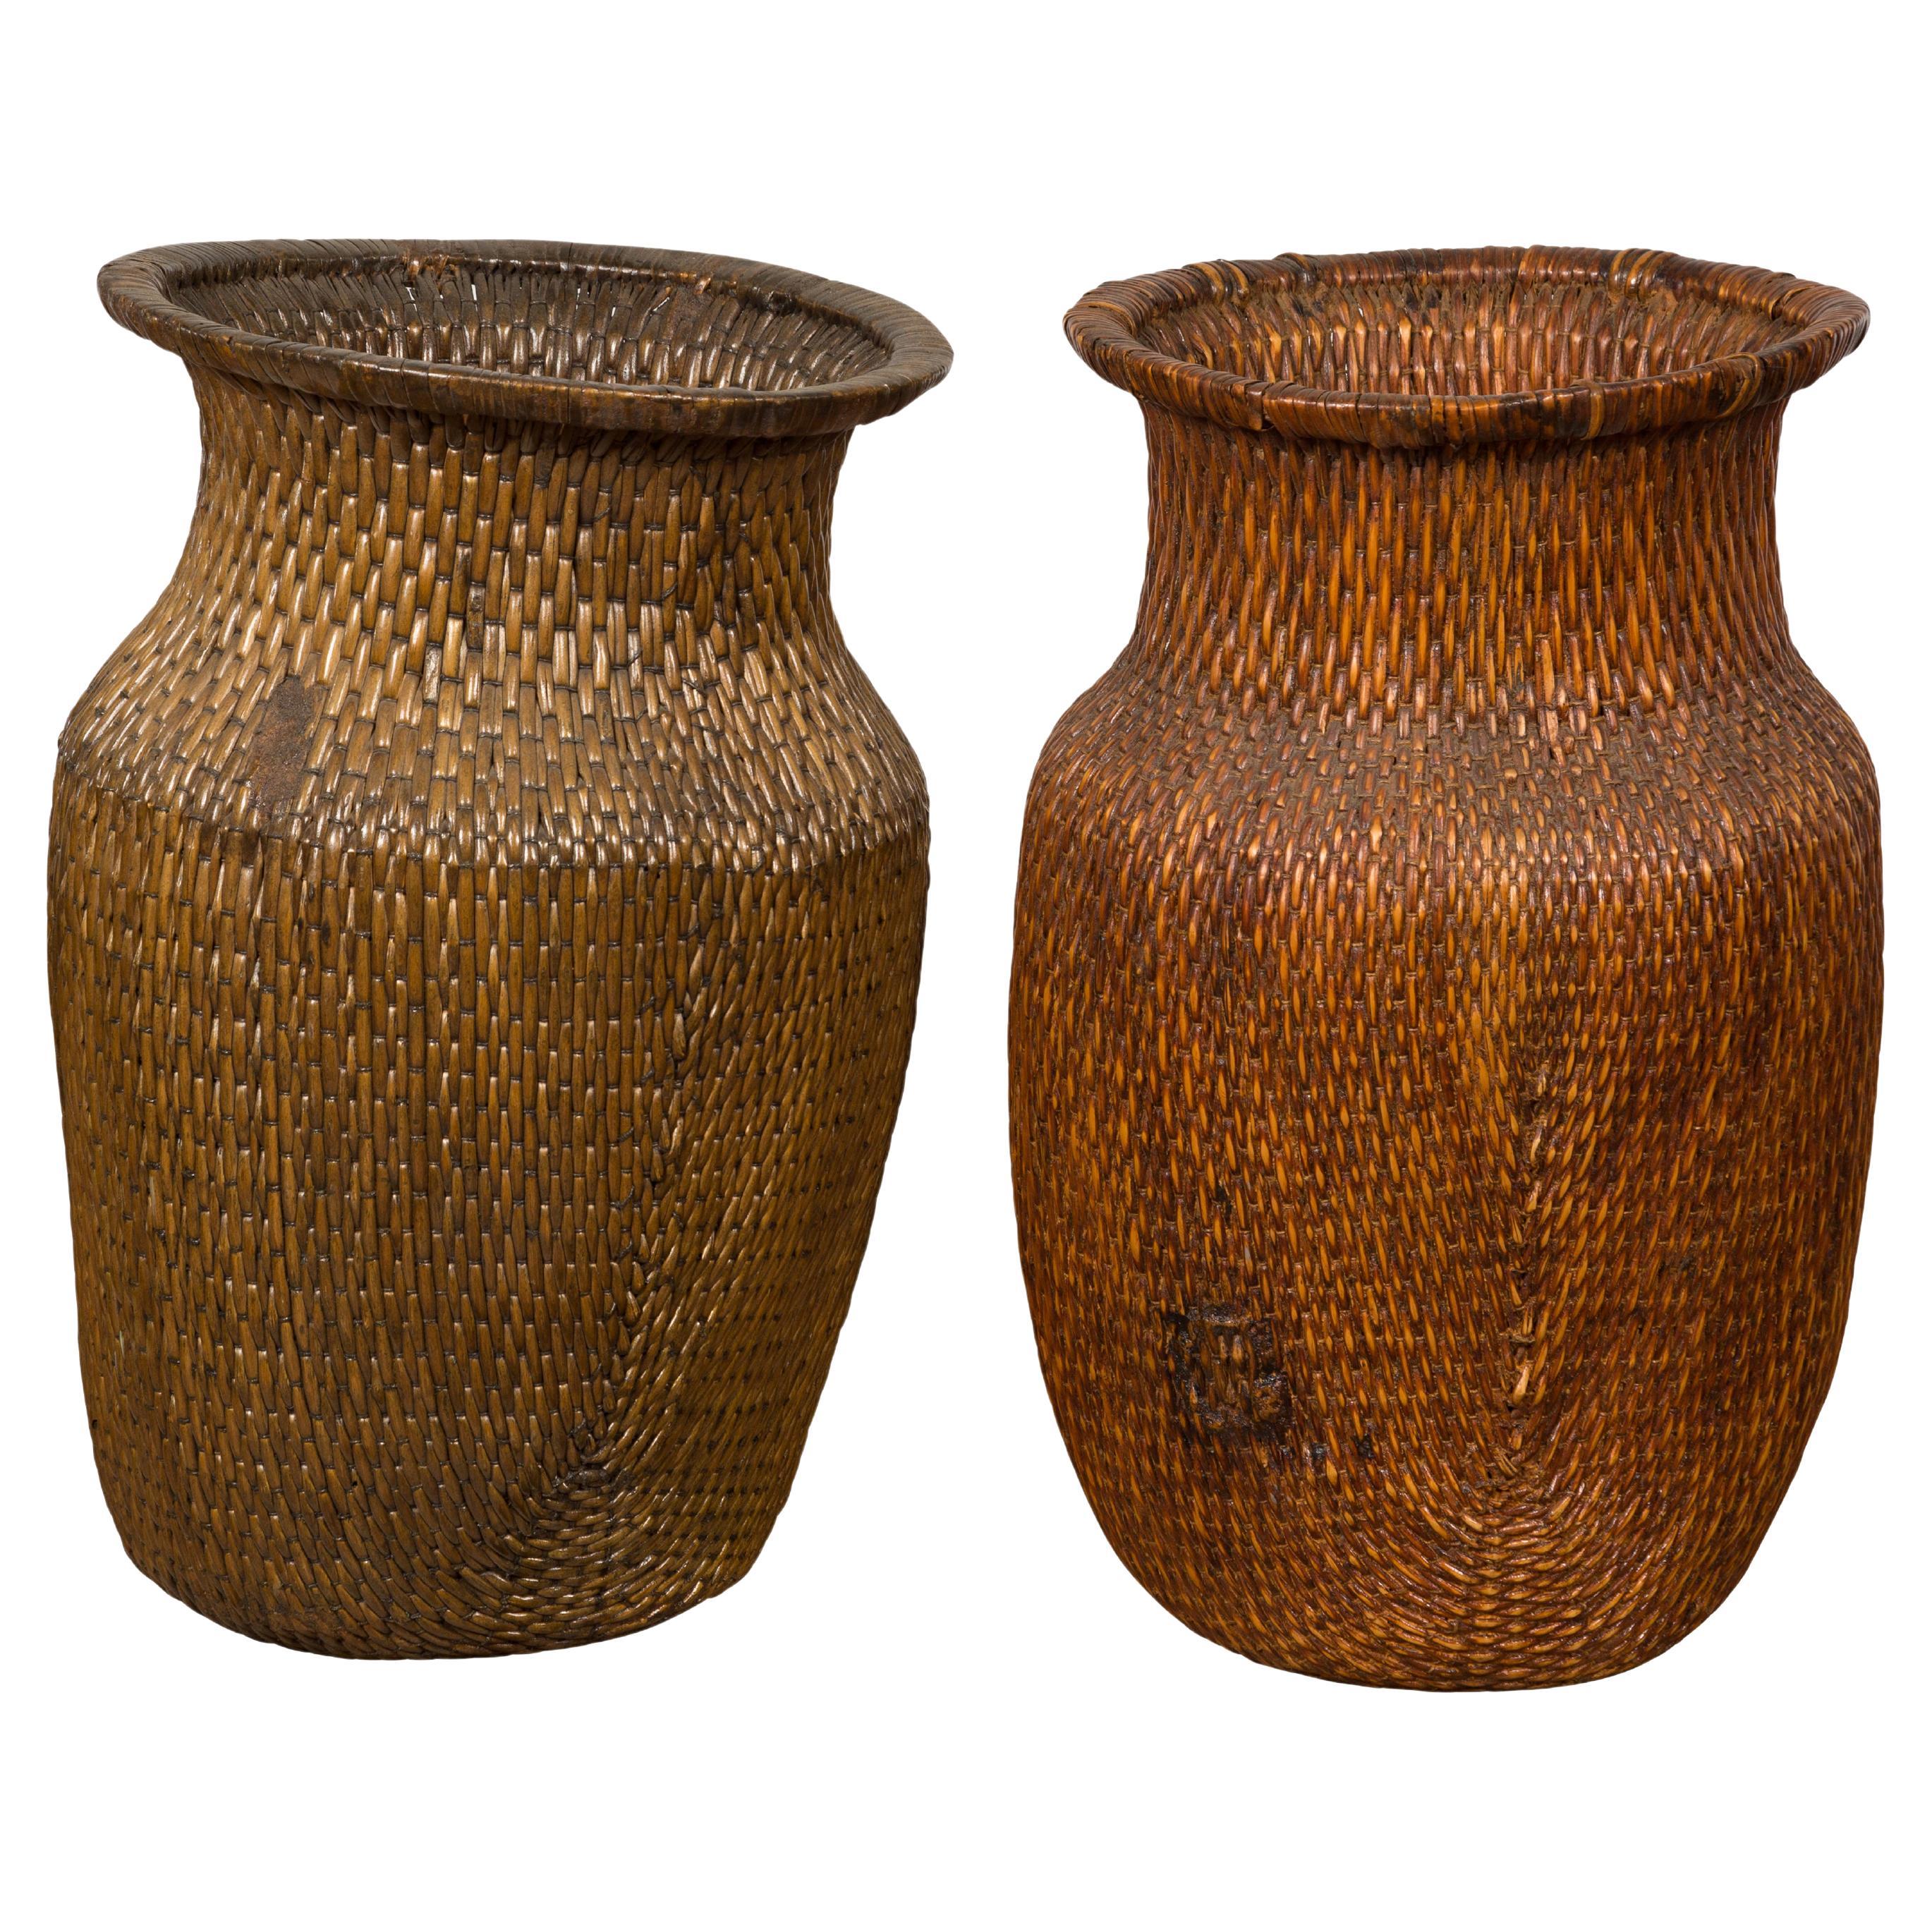 Two Oversized Chinese Rattan Grain Baskets with Flaring Necks, Sold Each